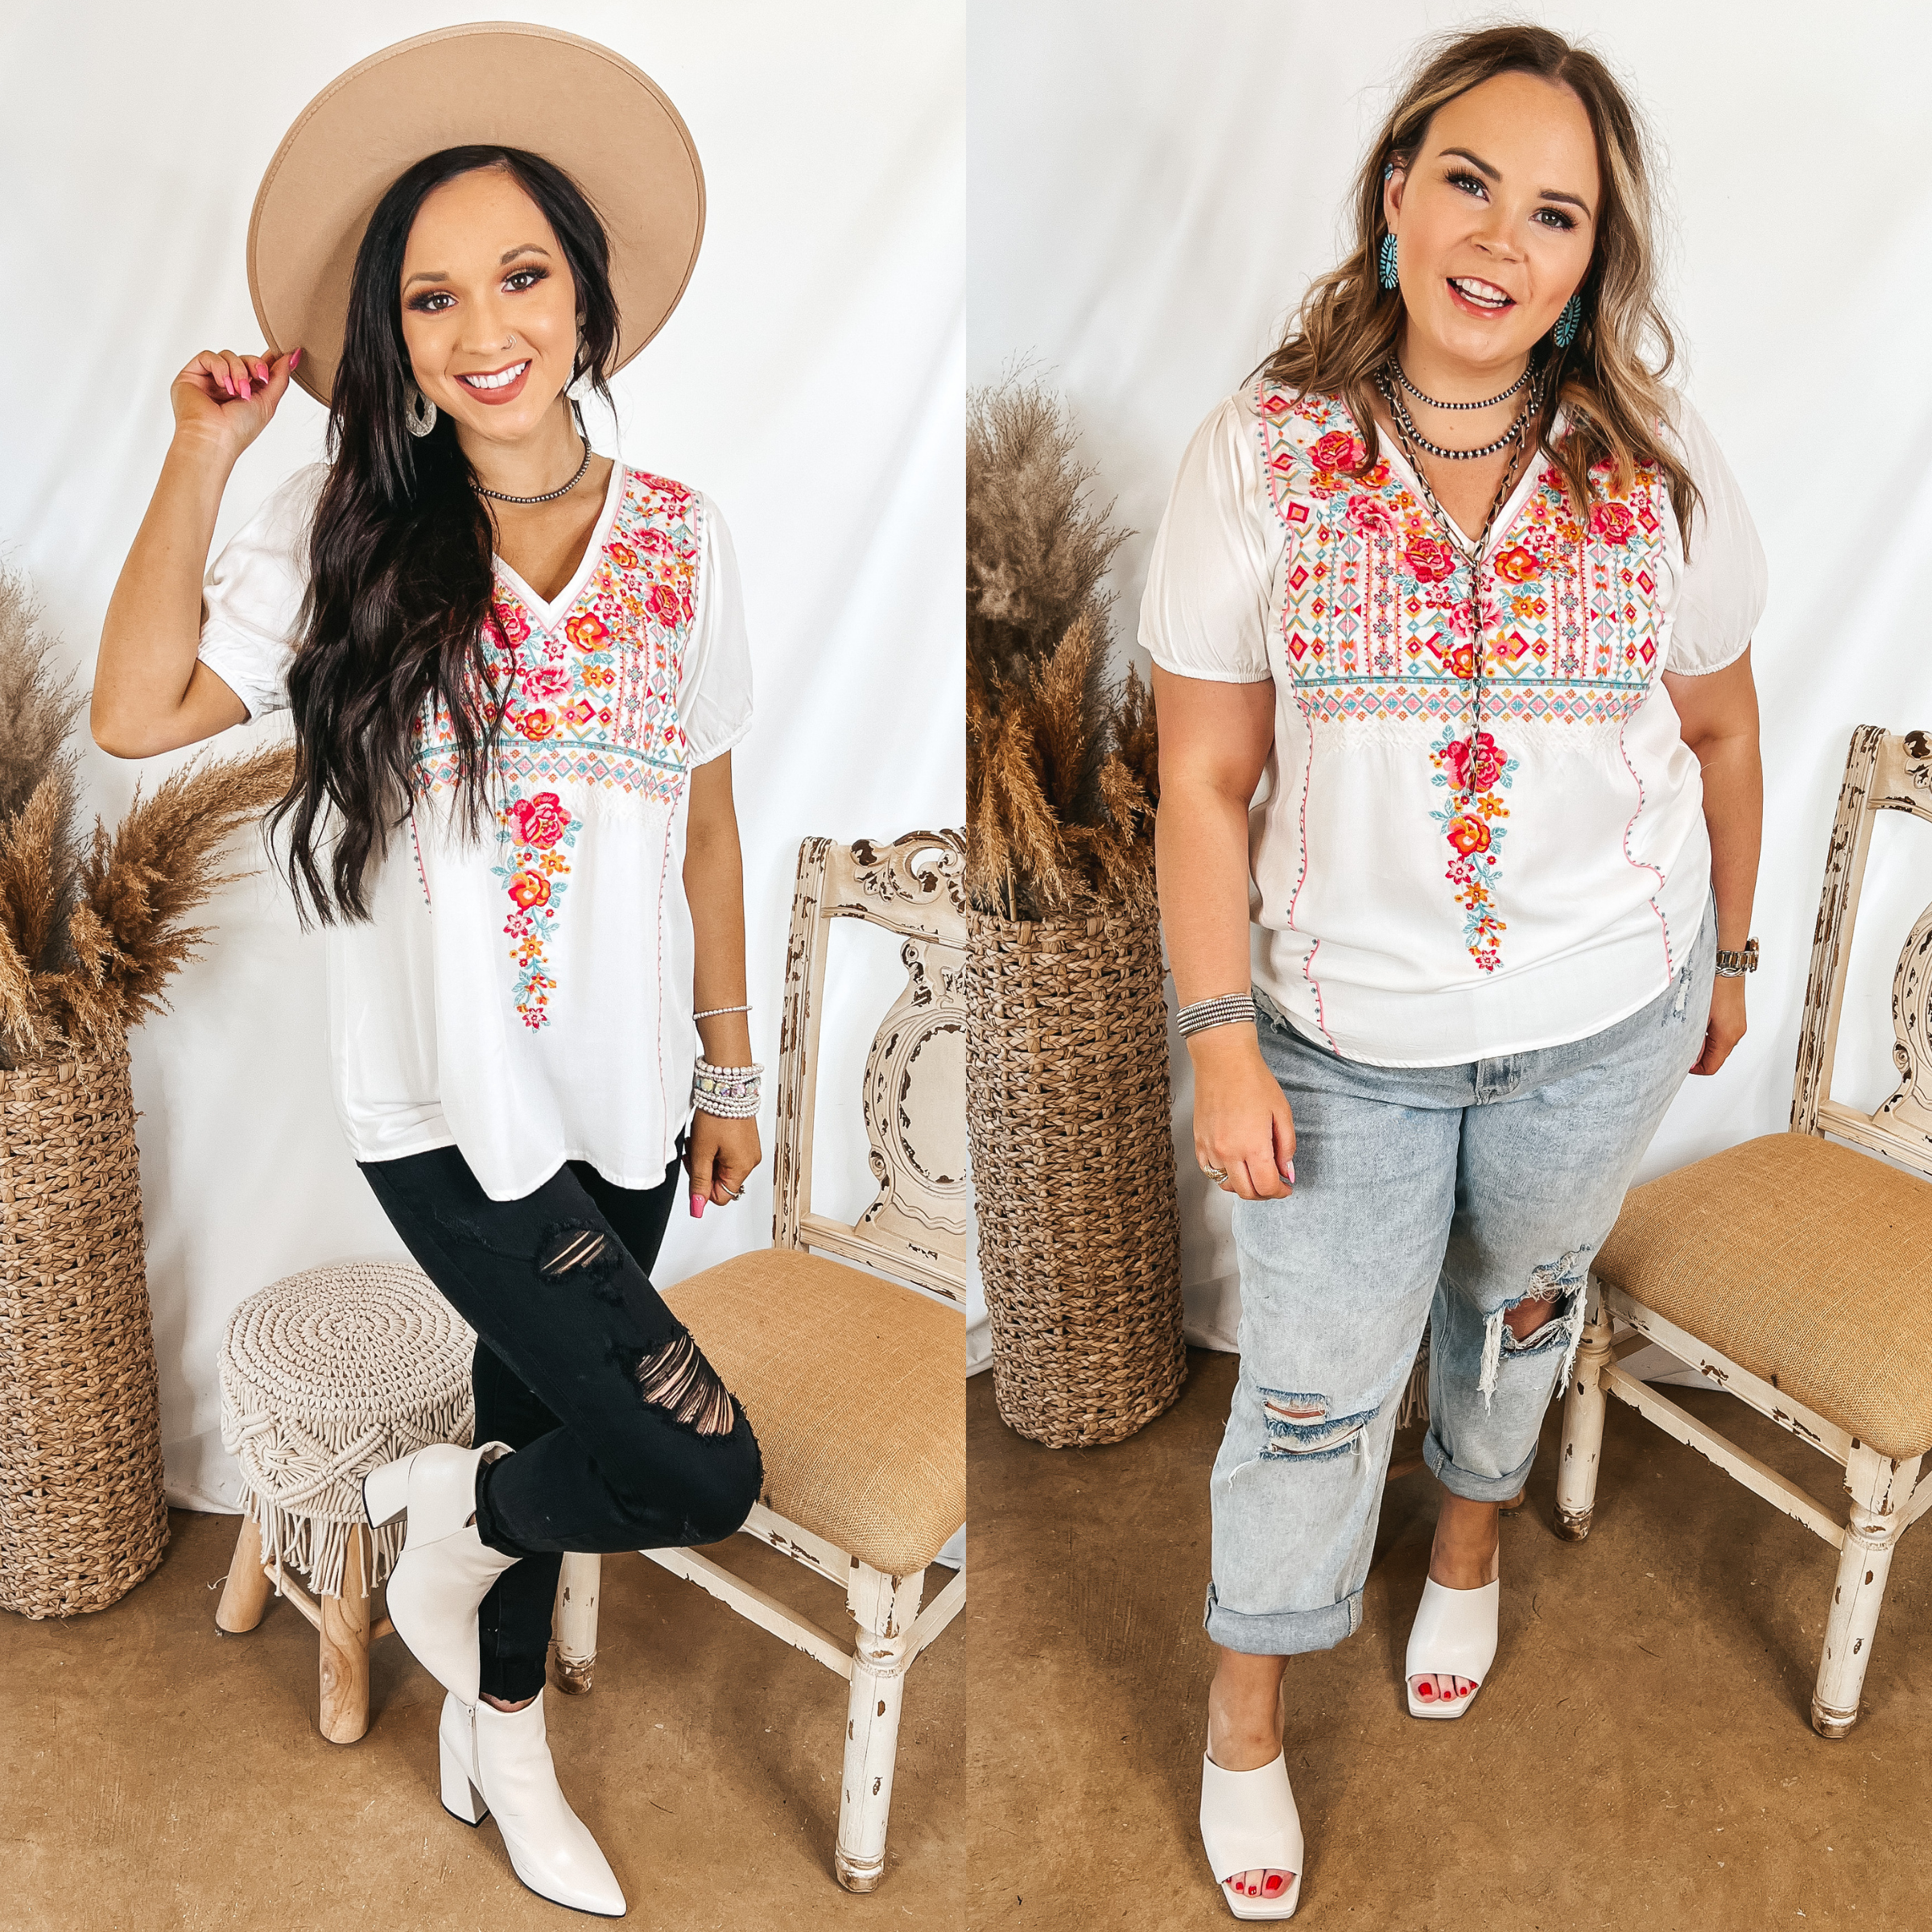 Models are wearing a white v neck tee with embroidery on the front. Size small model has it paired with black jeans, white booties, and  a tan hat. Size large model has it paired with light wash jeans, white heels, and silver jewelry.